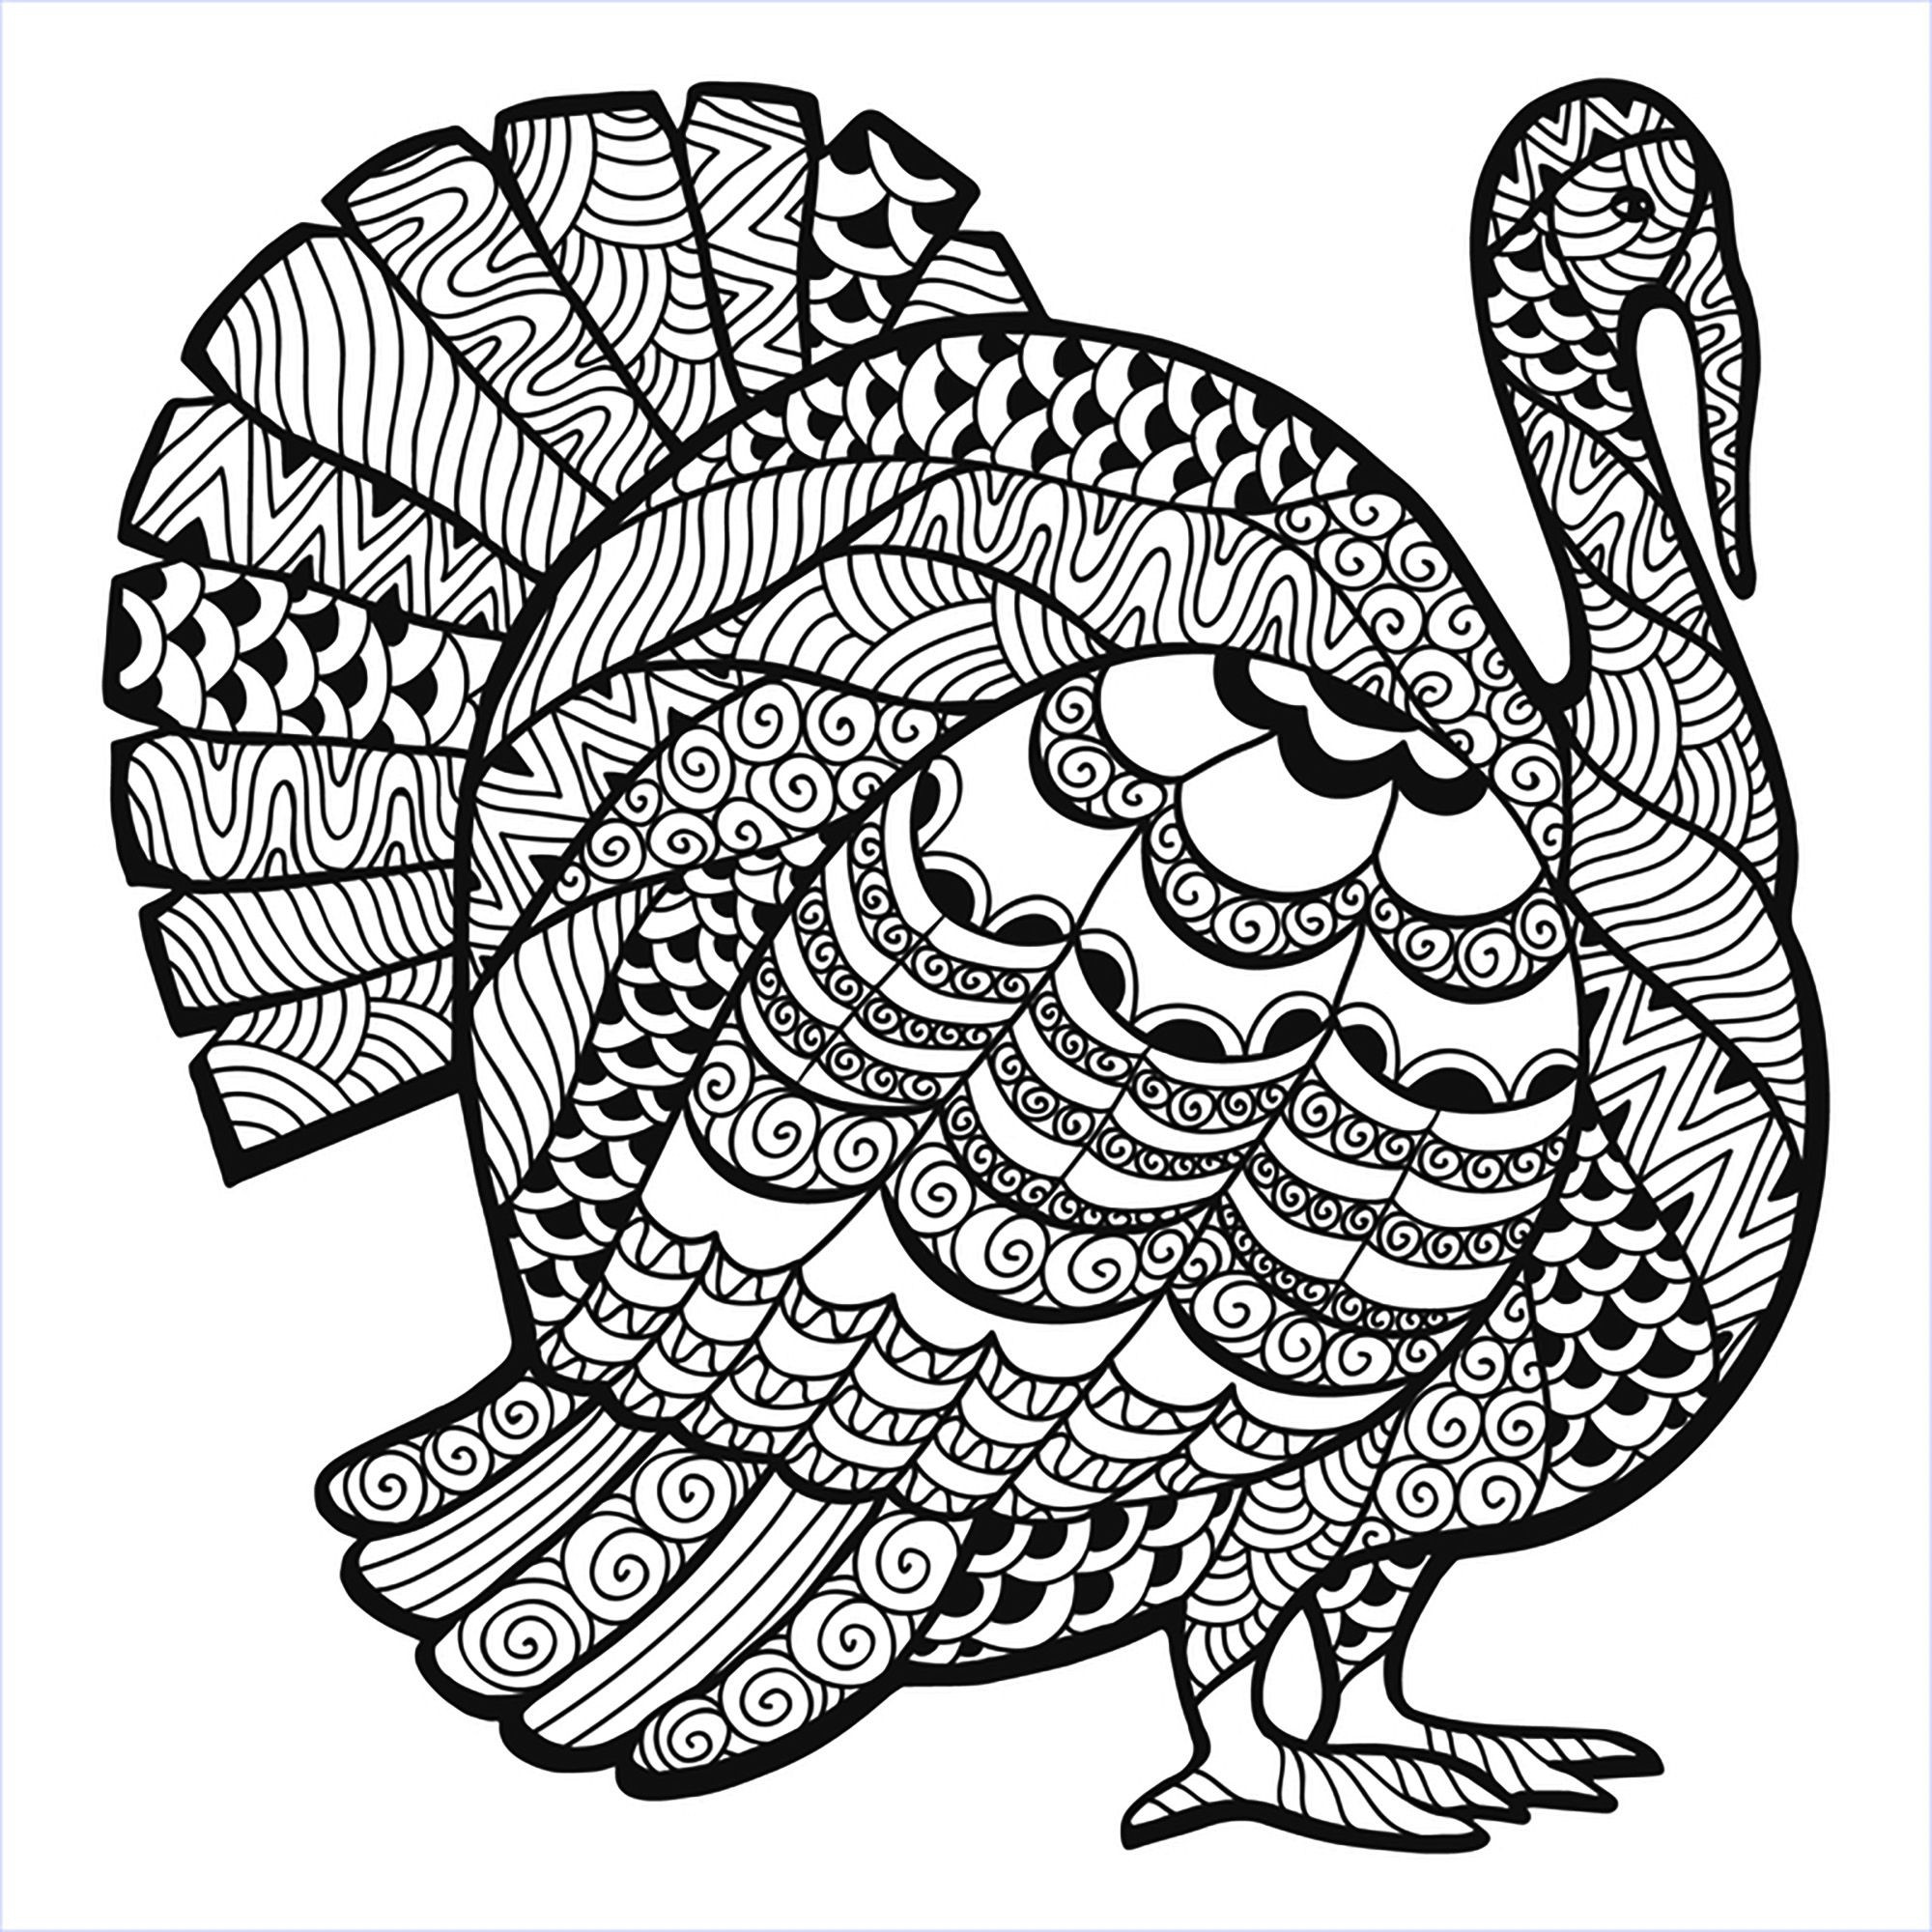 Zentangle Coloring Sheets For Boys
 Thanksgiving Turkey Zentangle Coloring page From the